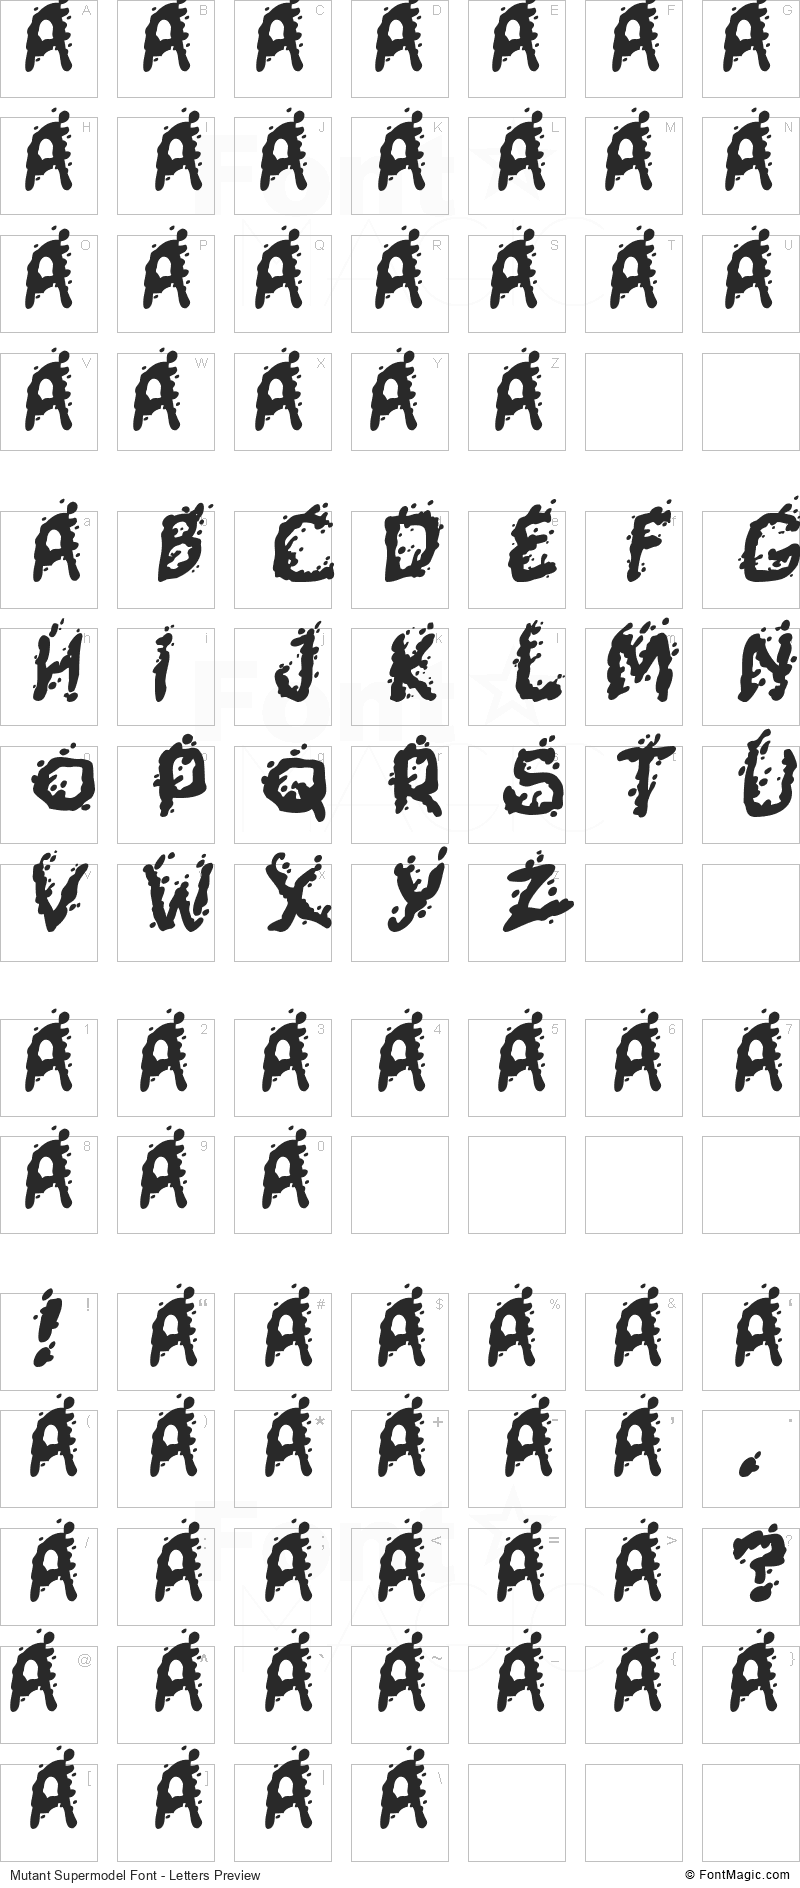 Mutant Supermodel Font - All Latters Preview Chart